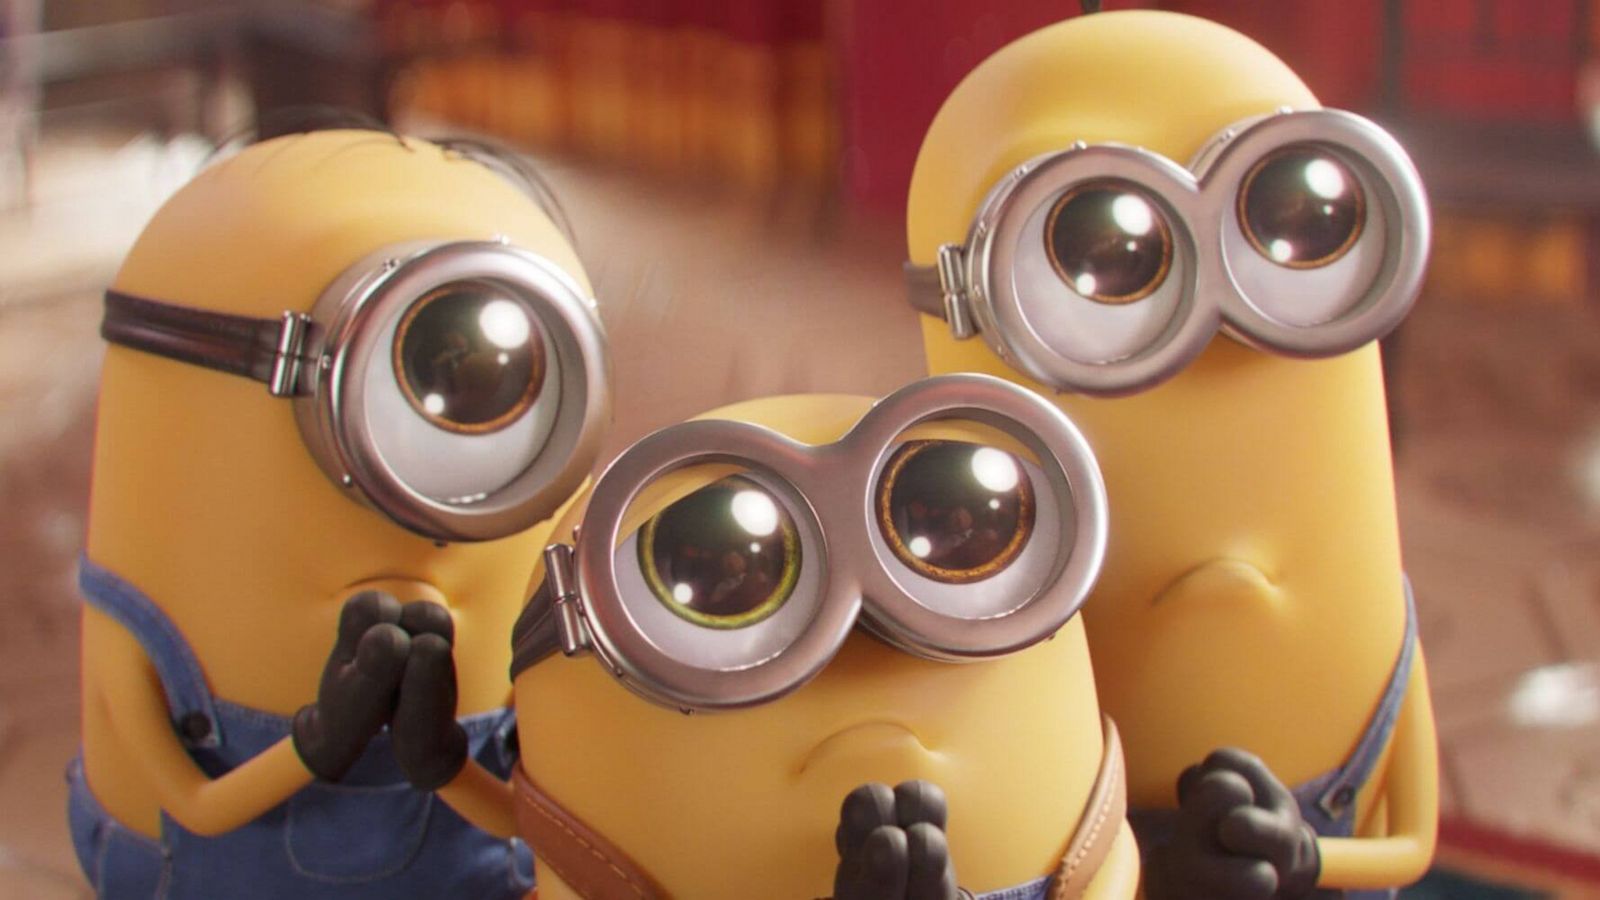 Ingenious Marketing Behind Minions That Made It The Top Grossing Animated Franchise Of All Time